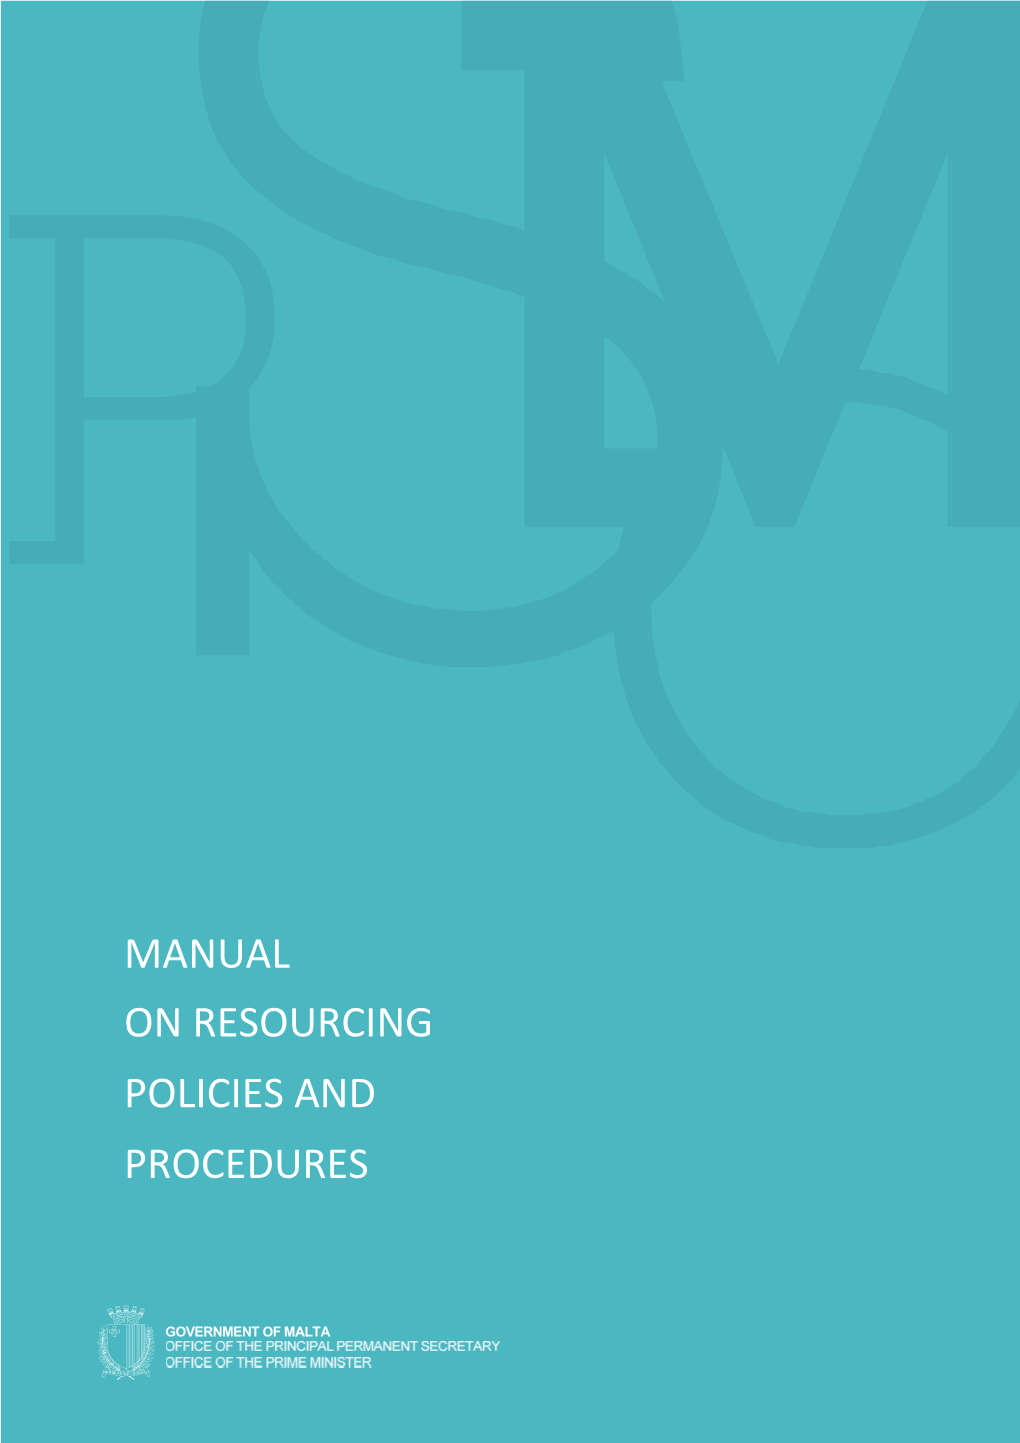 Manual on Resourcing Policies and Procedures